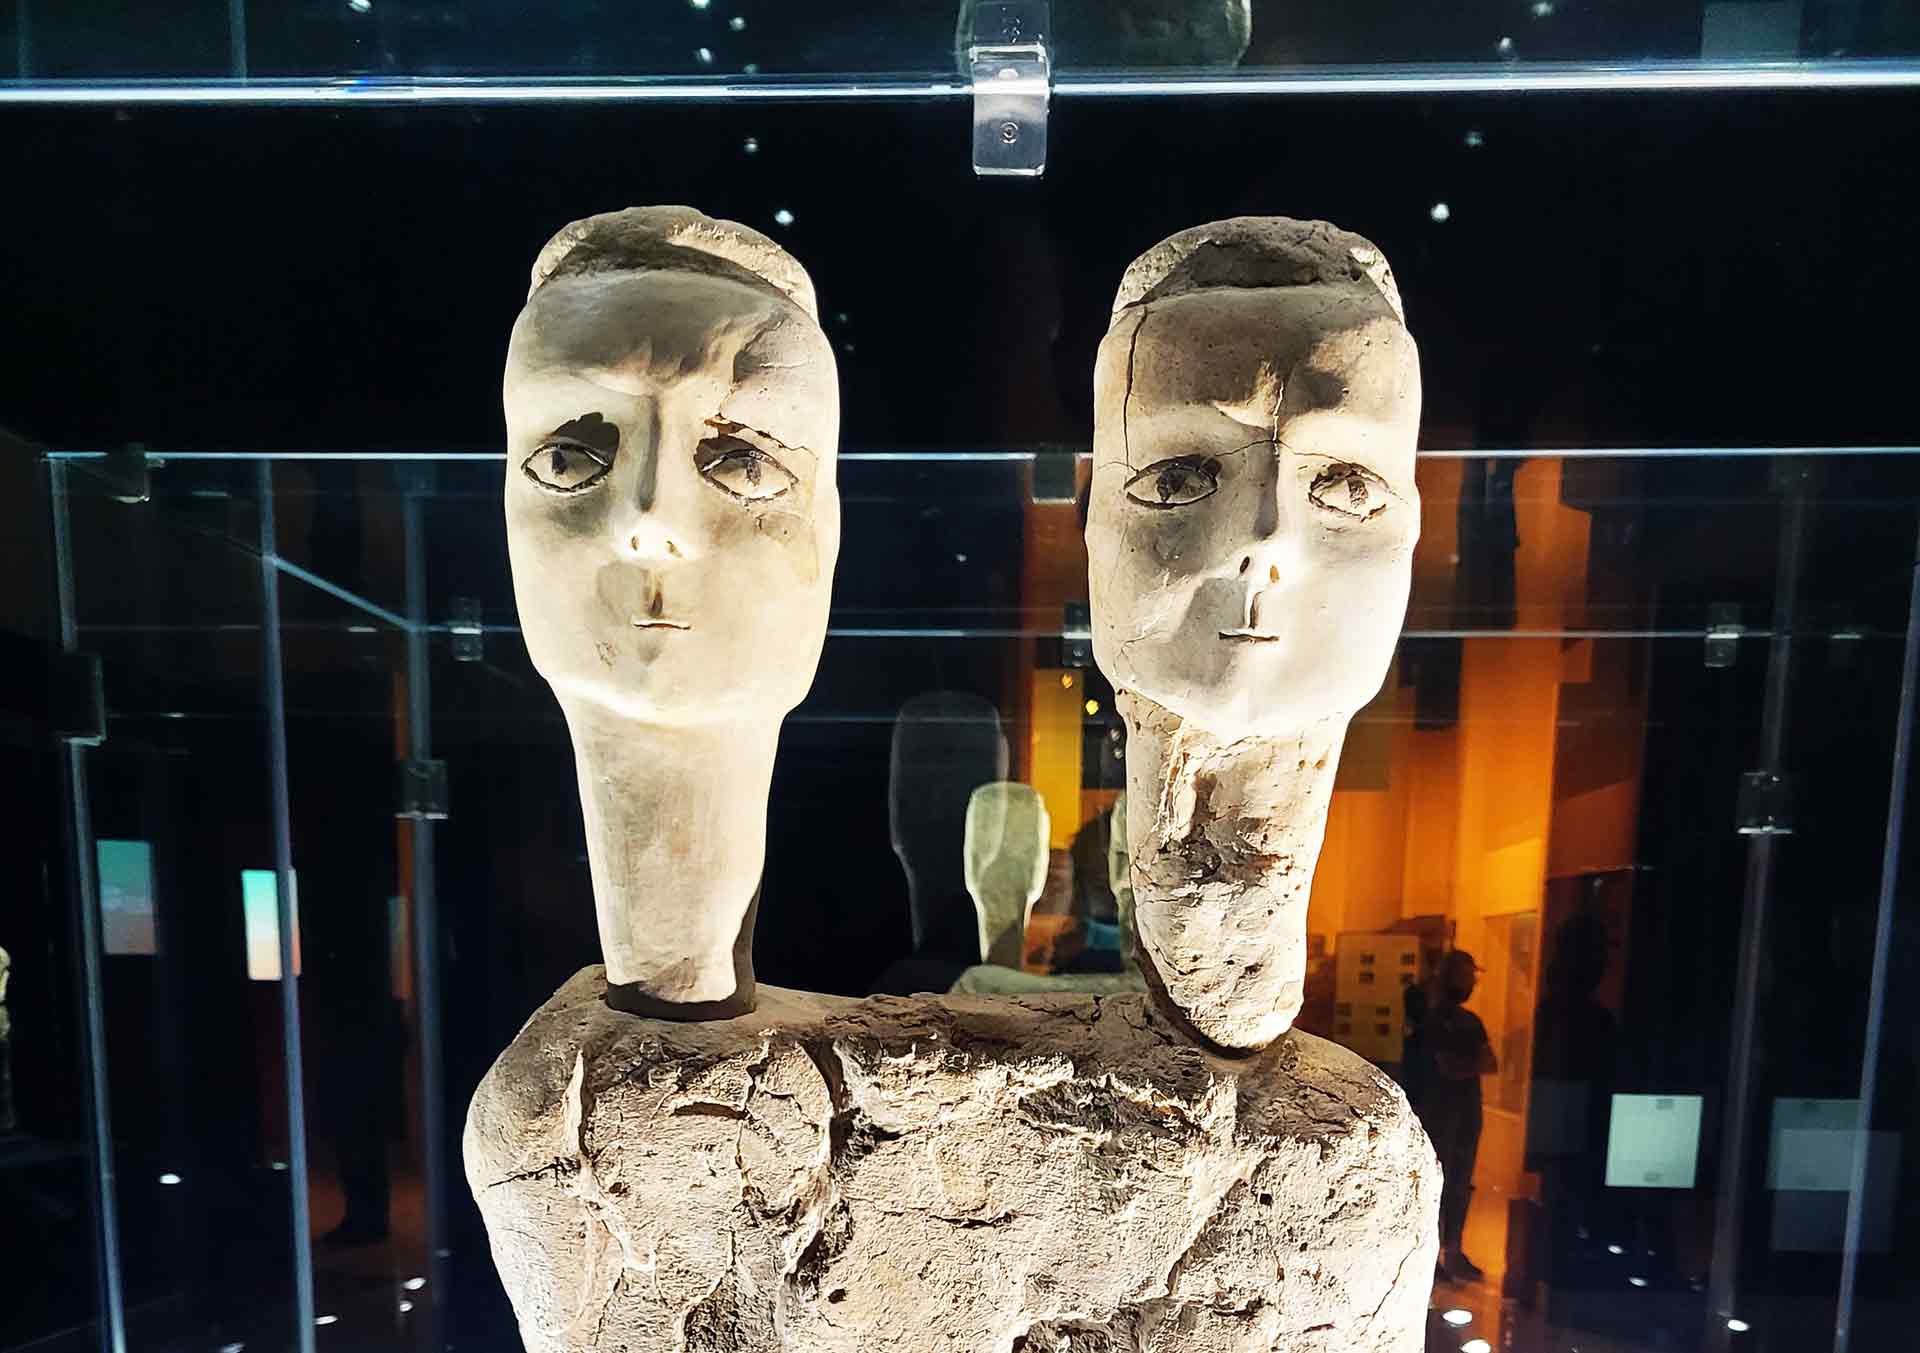 The Ain Ghazal statues found at the Jordan Museum in Amman are the oldest statues in the world